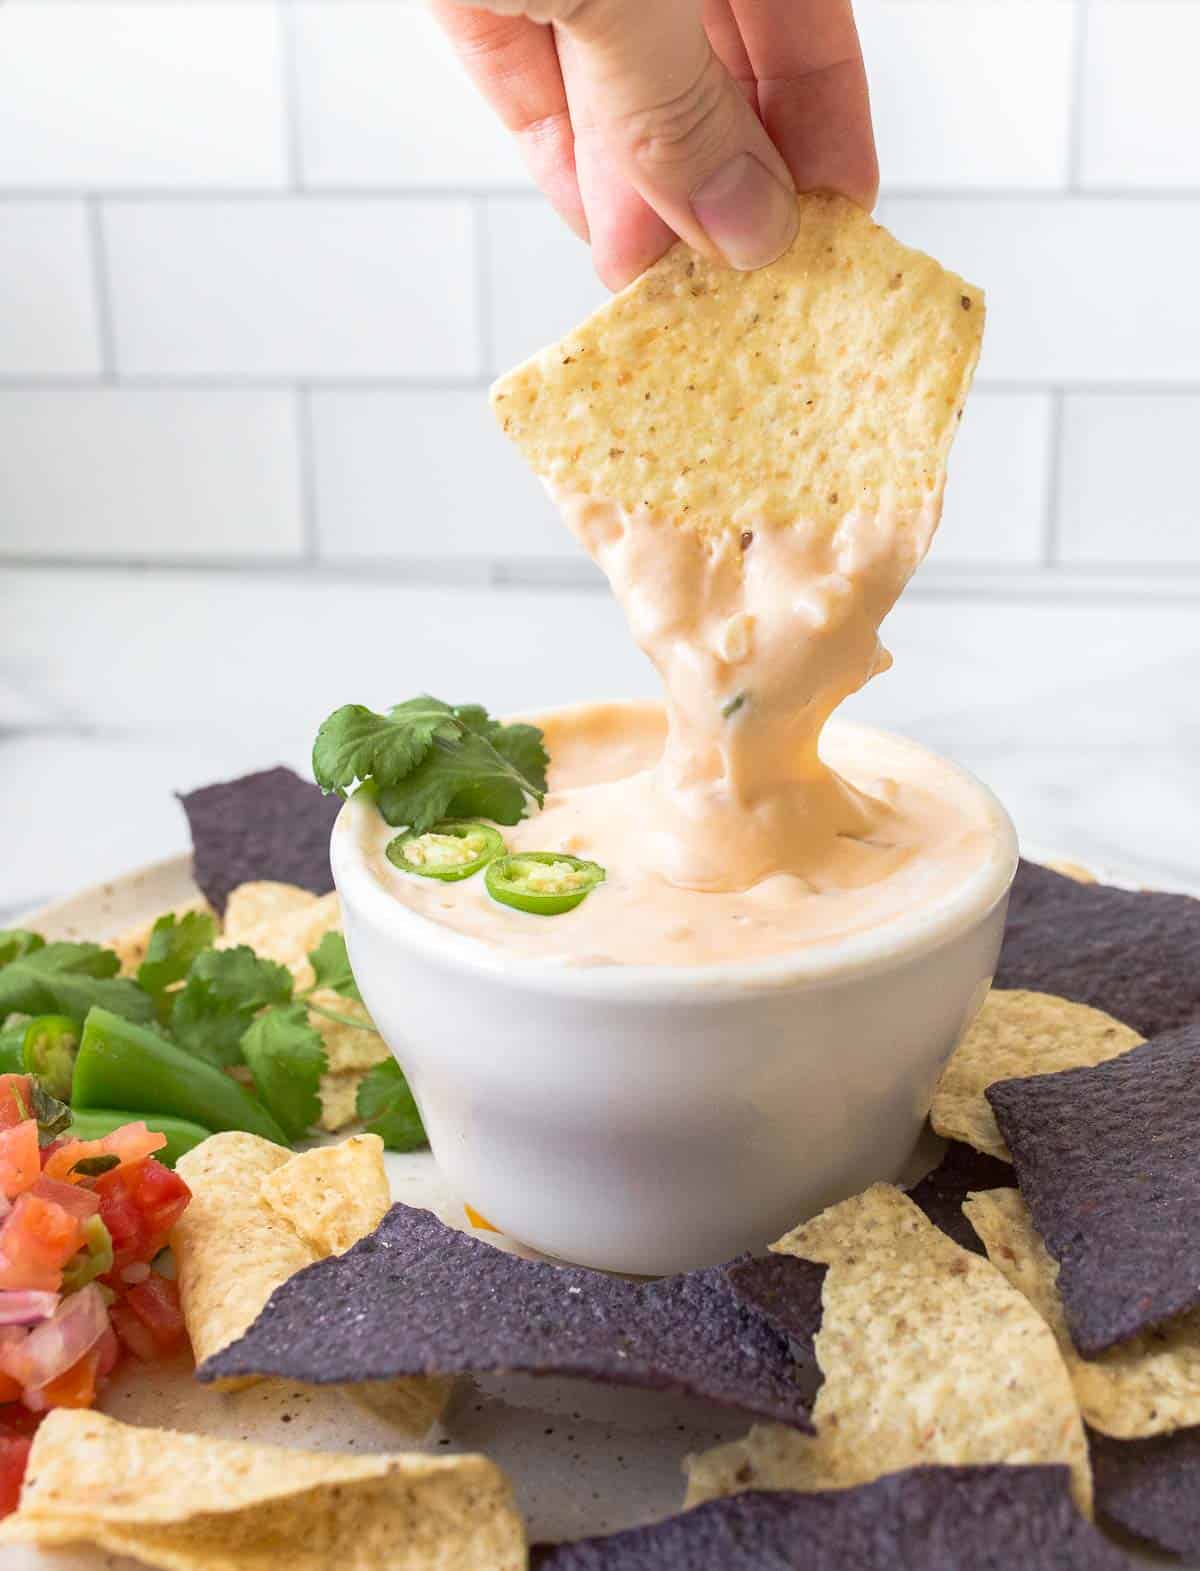 Tortilla chip being dipped into queso with cilantro and pepper garnish.